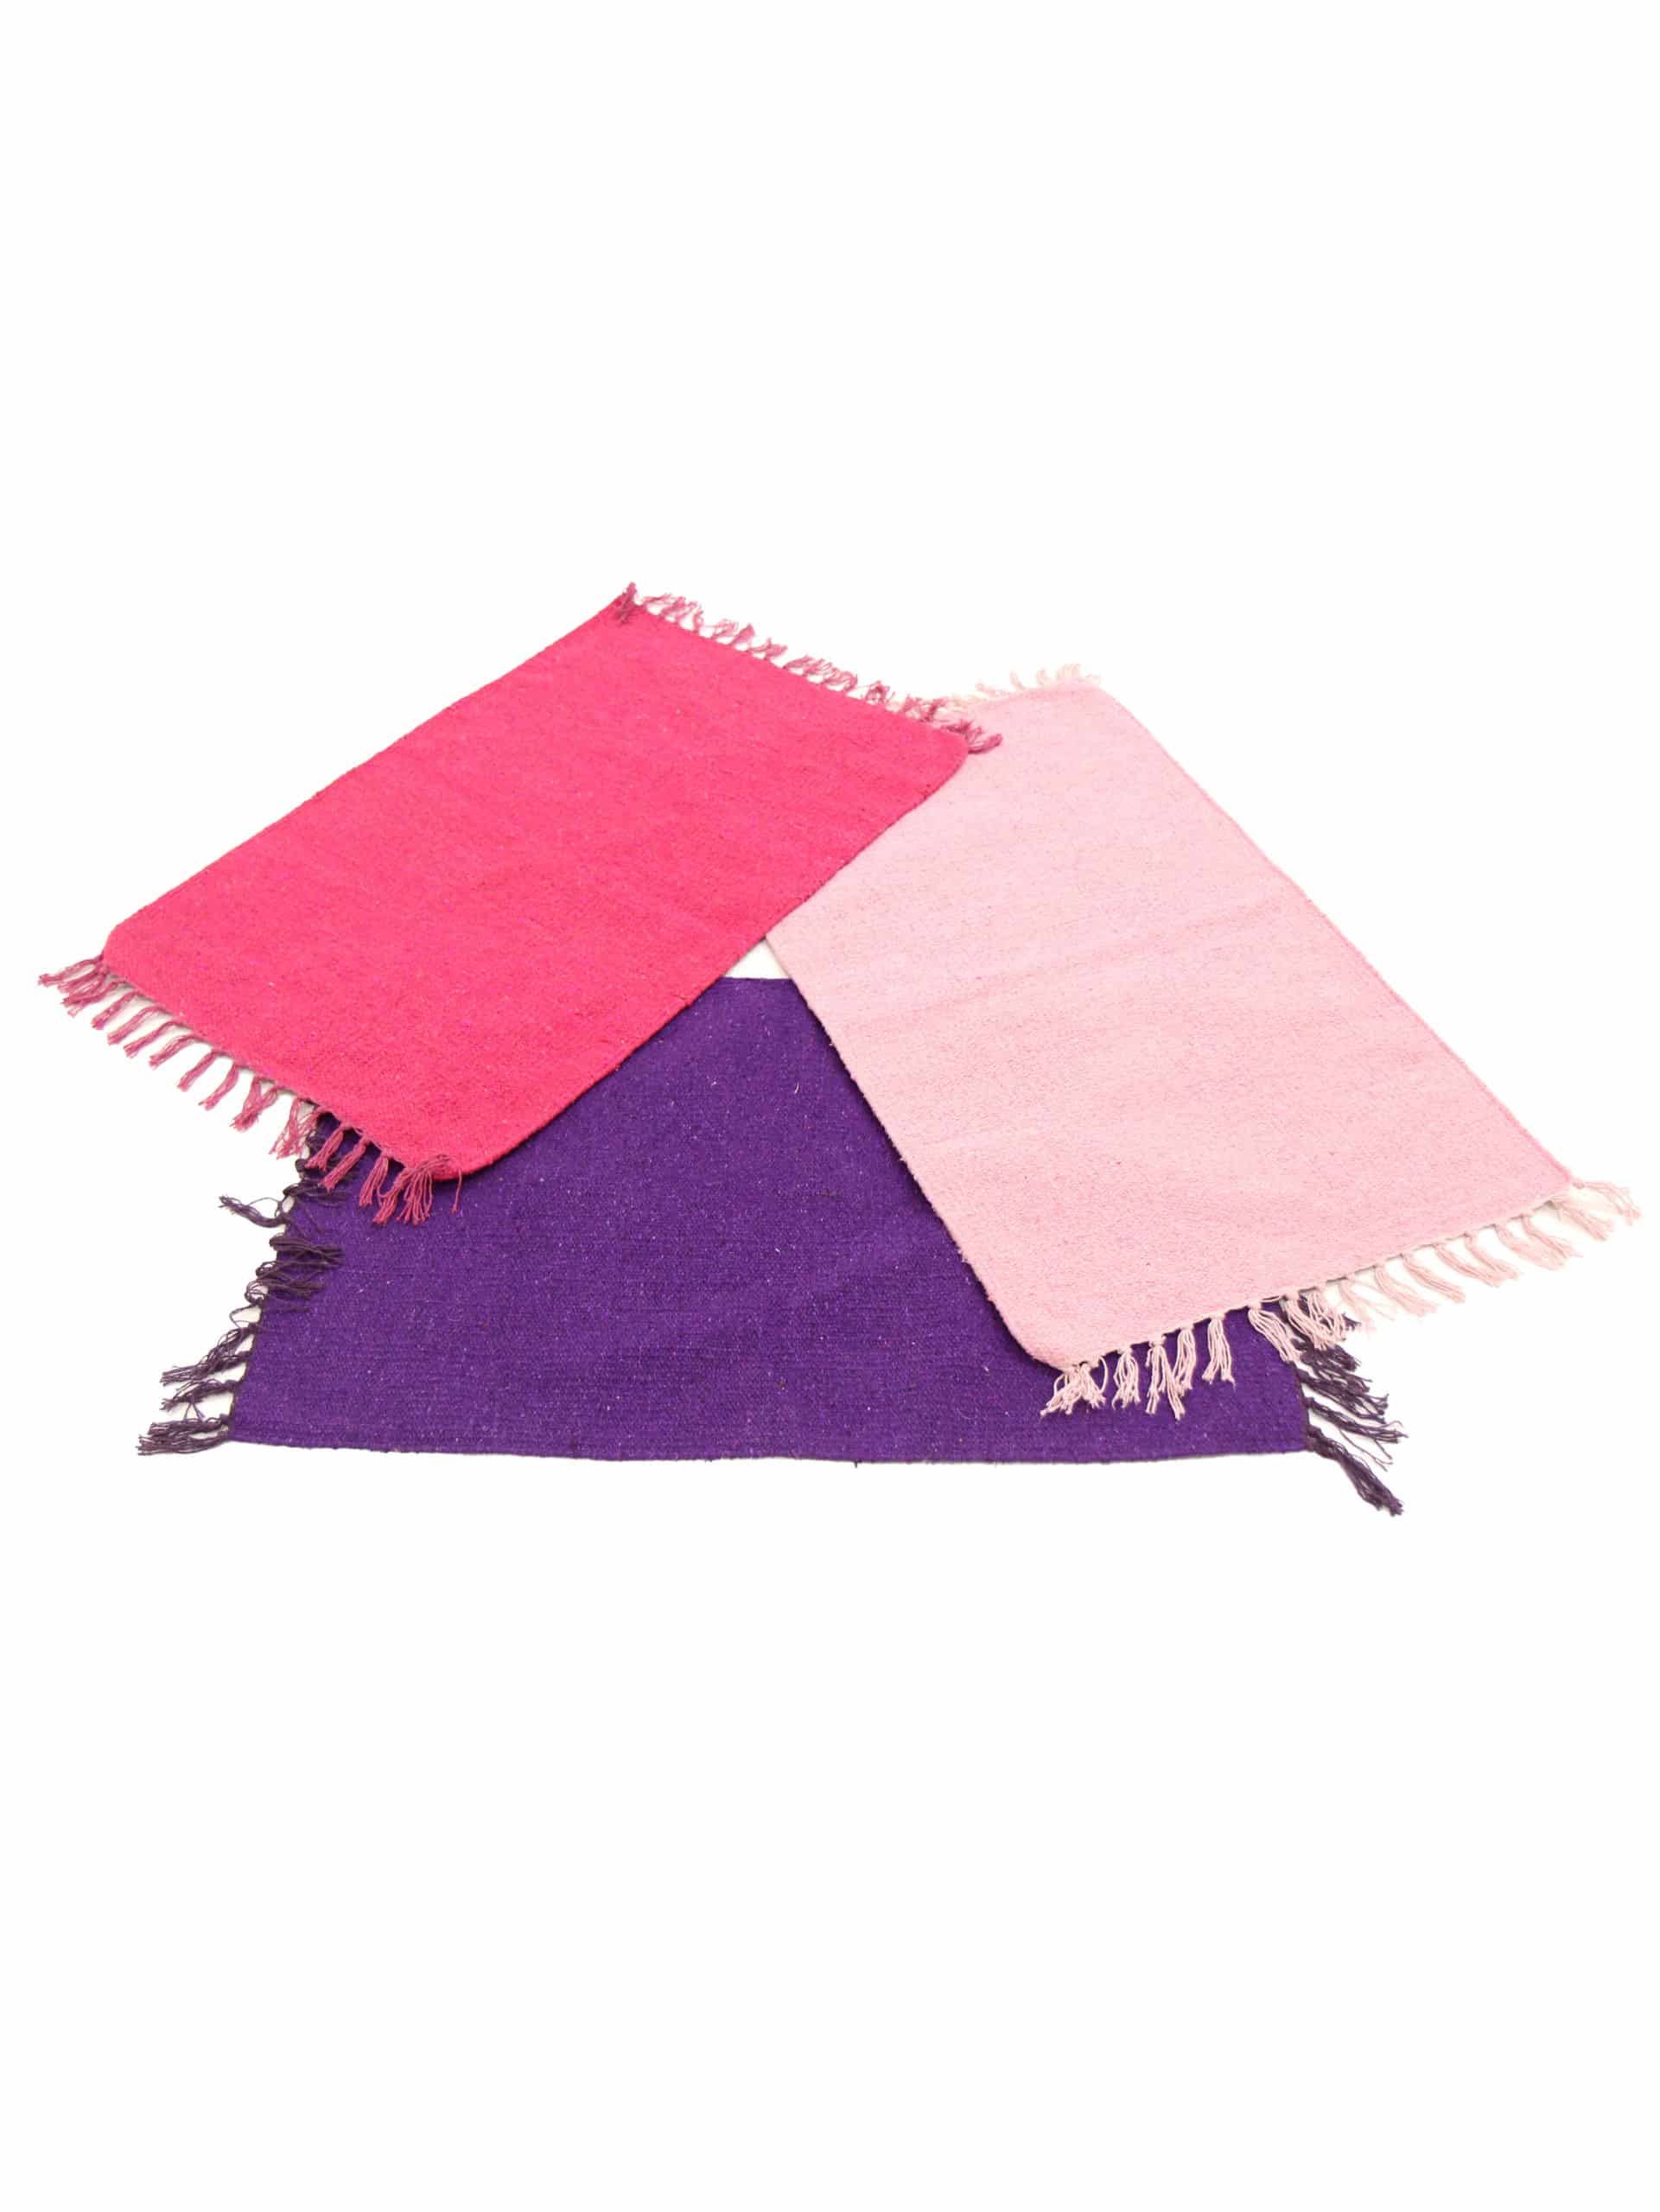 Woven Rugs - Set of 3 - Pinks